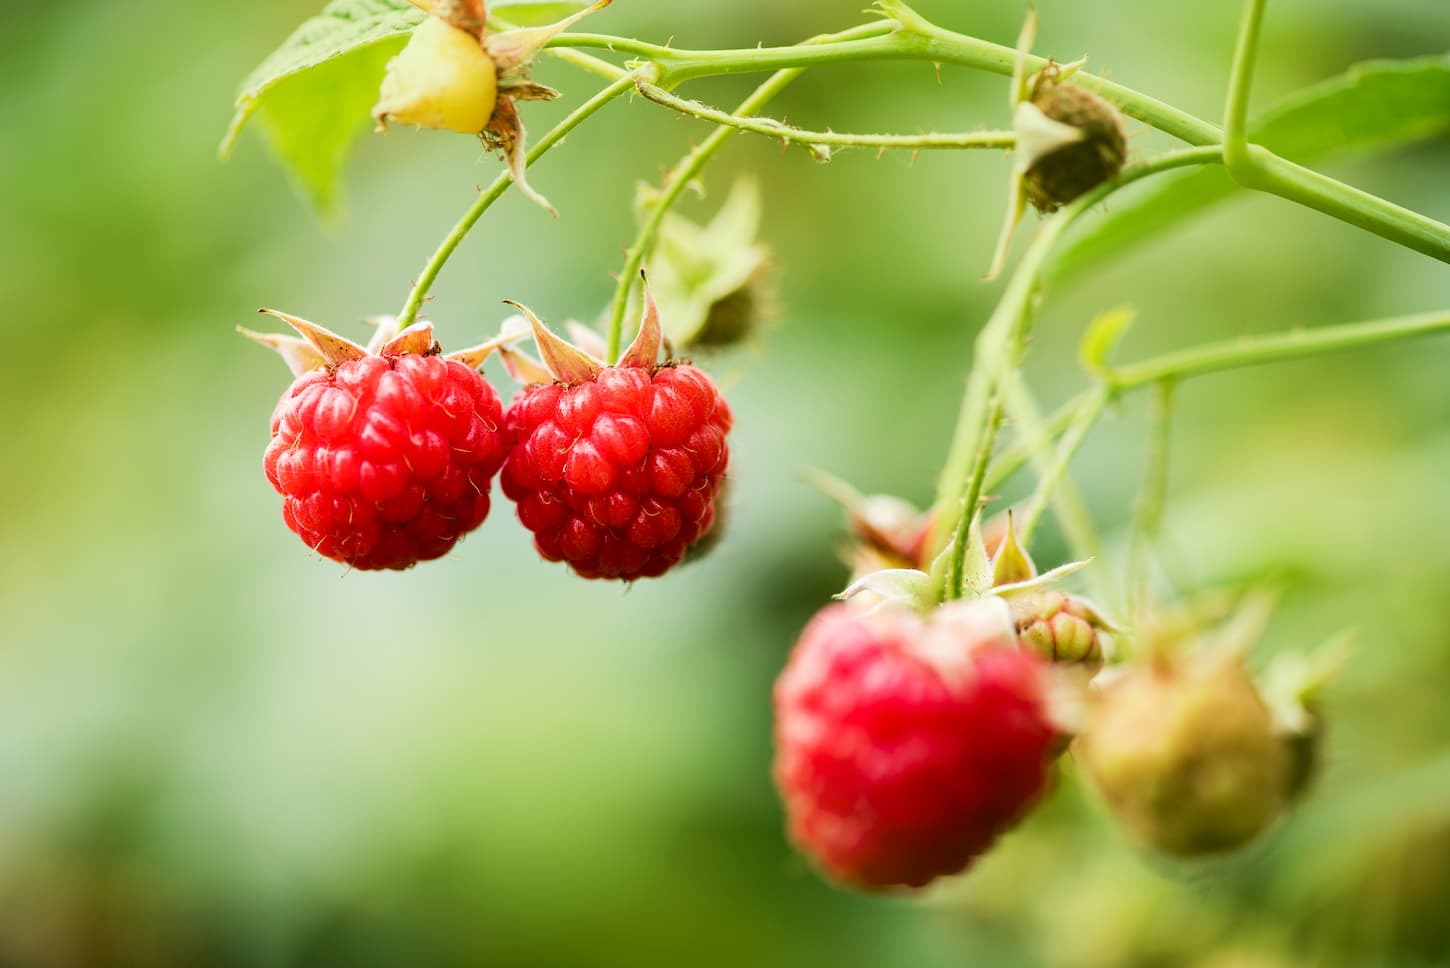 A close-up image of raspberries growing in a farm.